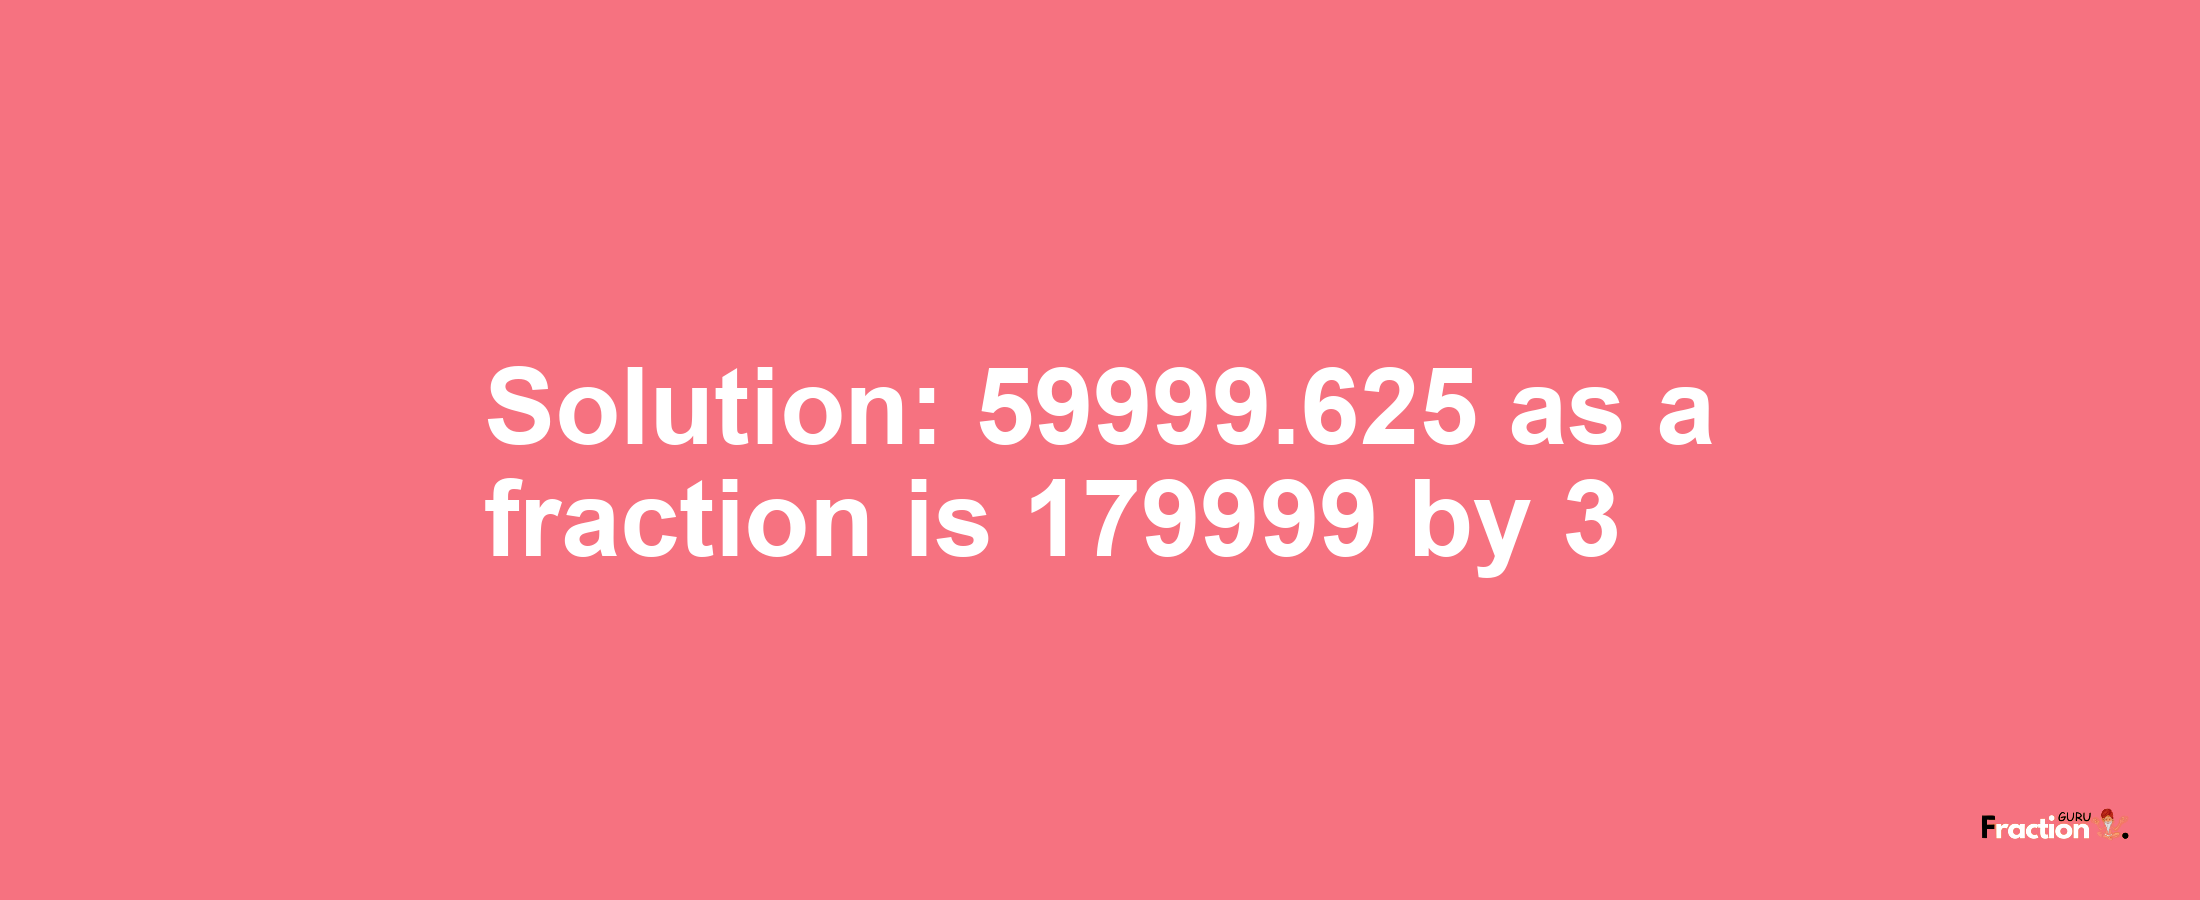 Solution:59999.625 as a fraction is 179999/3